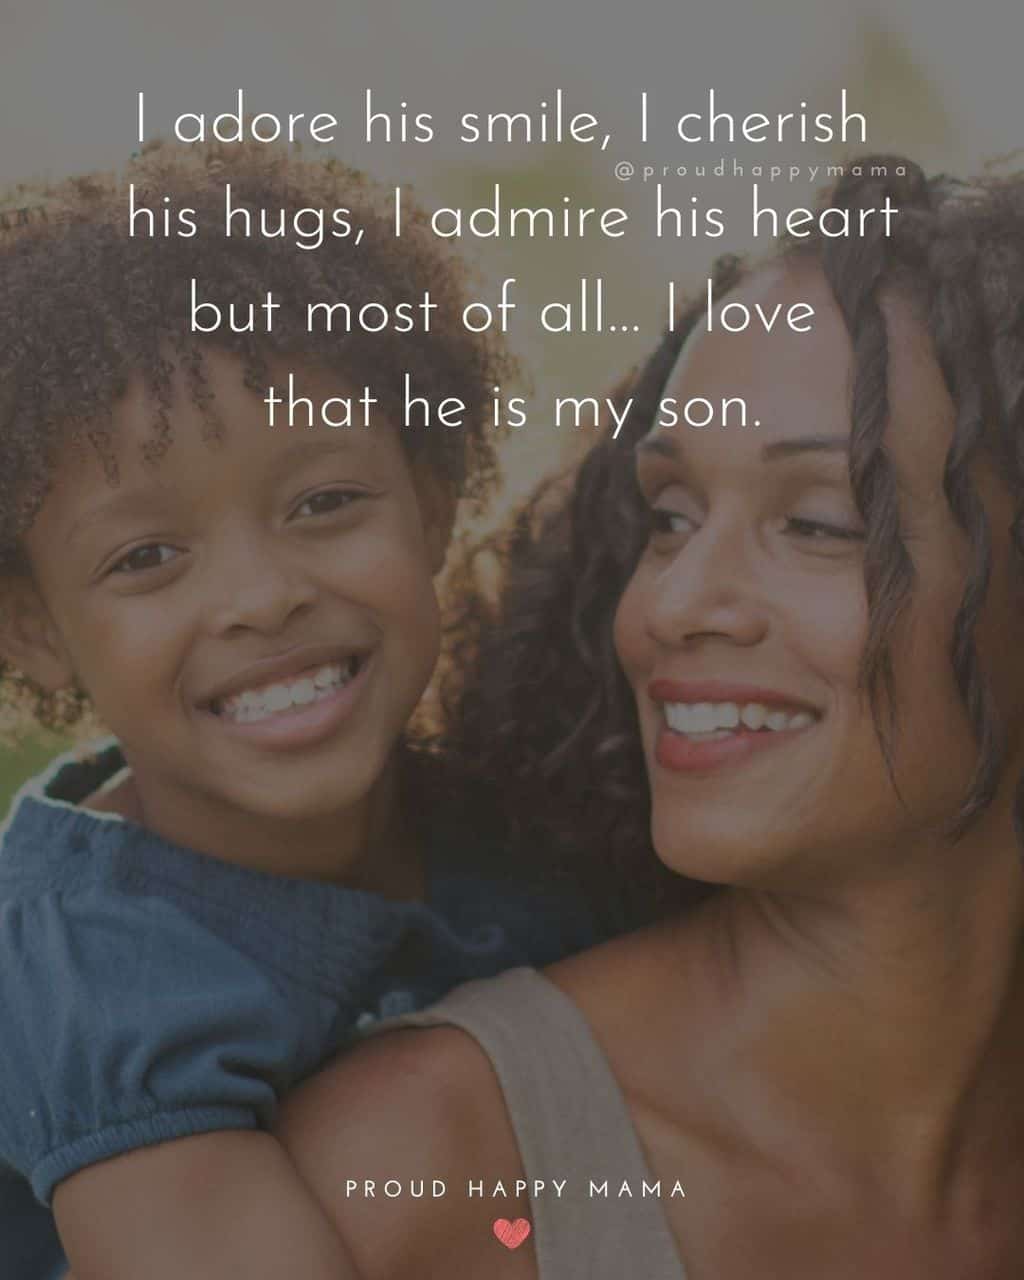 Son Quotes - I adore his smile, I cherish his hugs, I admire his heart but most of all… I love that he is my son.’